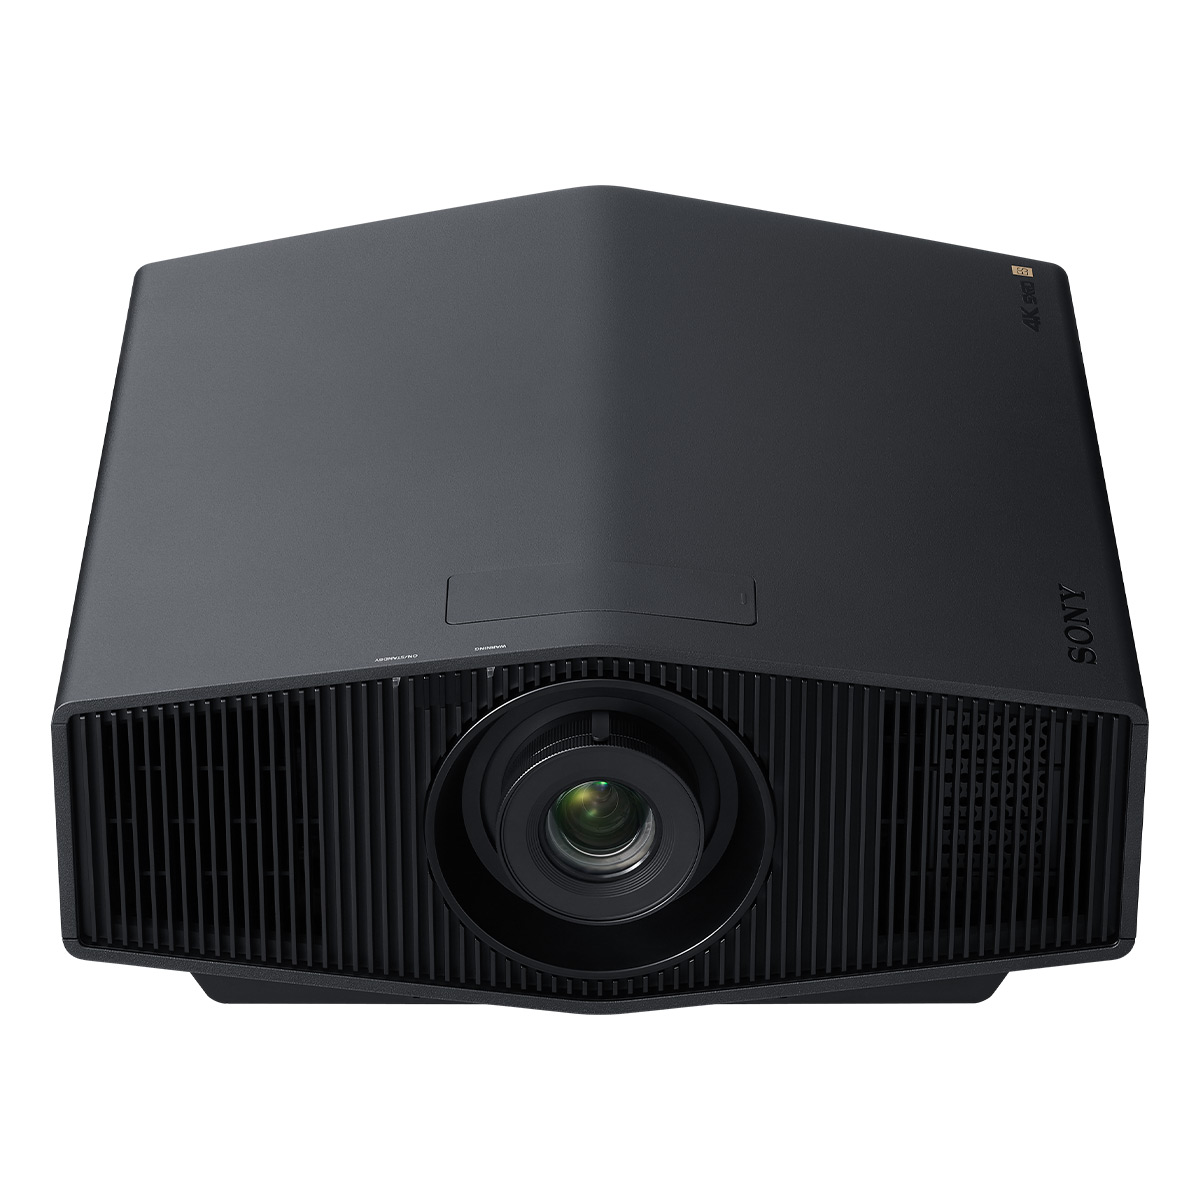 Sony VPL-XW5000ES 4K HDR Laser Home Theater Projector with Wide Dynamic Range Optics, 95% DCI-P3 Wide Color Gamut, & 2,000 Lumen Brightness (Black) - image 3 of 8